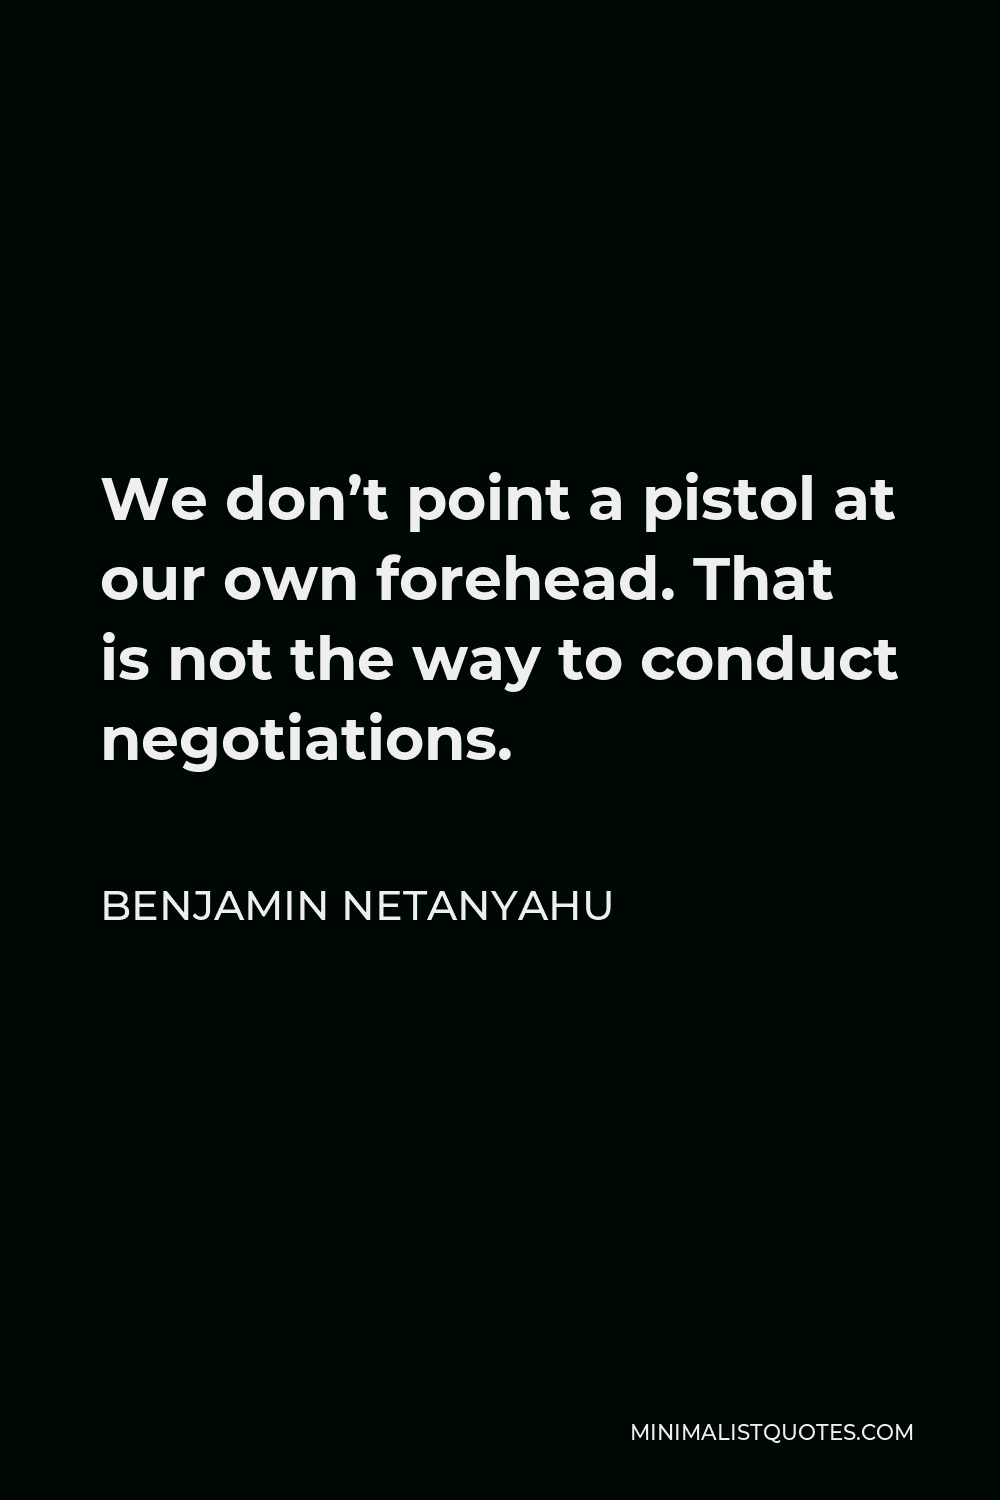 Benjamin Netanyahu Quote - We don’t point a pistol at our own forehead. That is not the way to conduct negotiations.